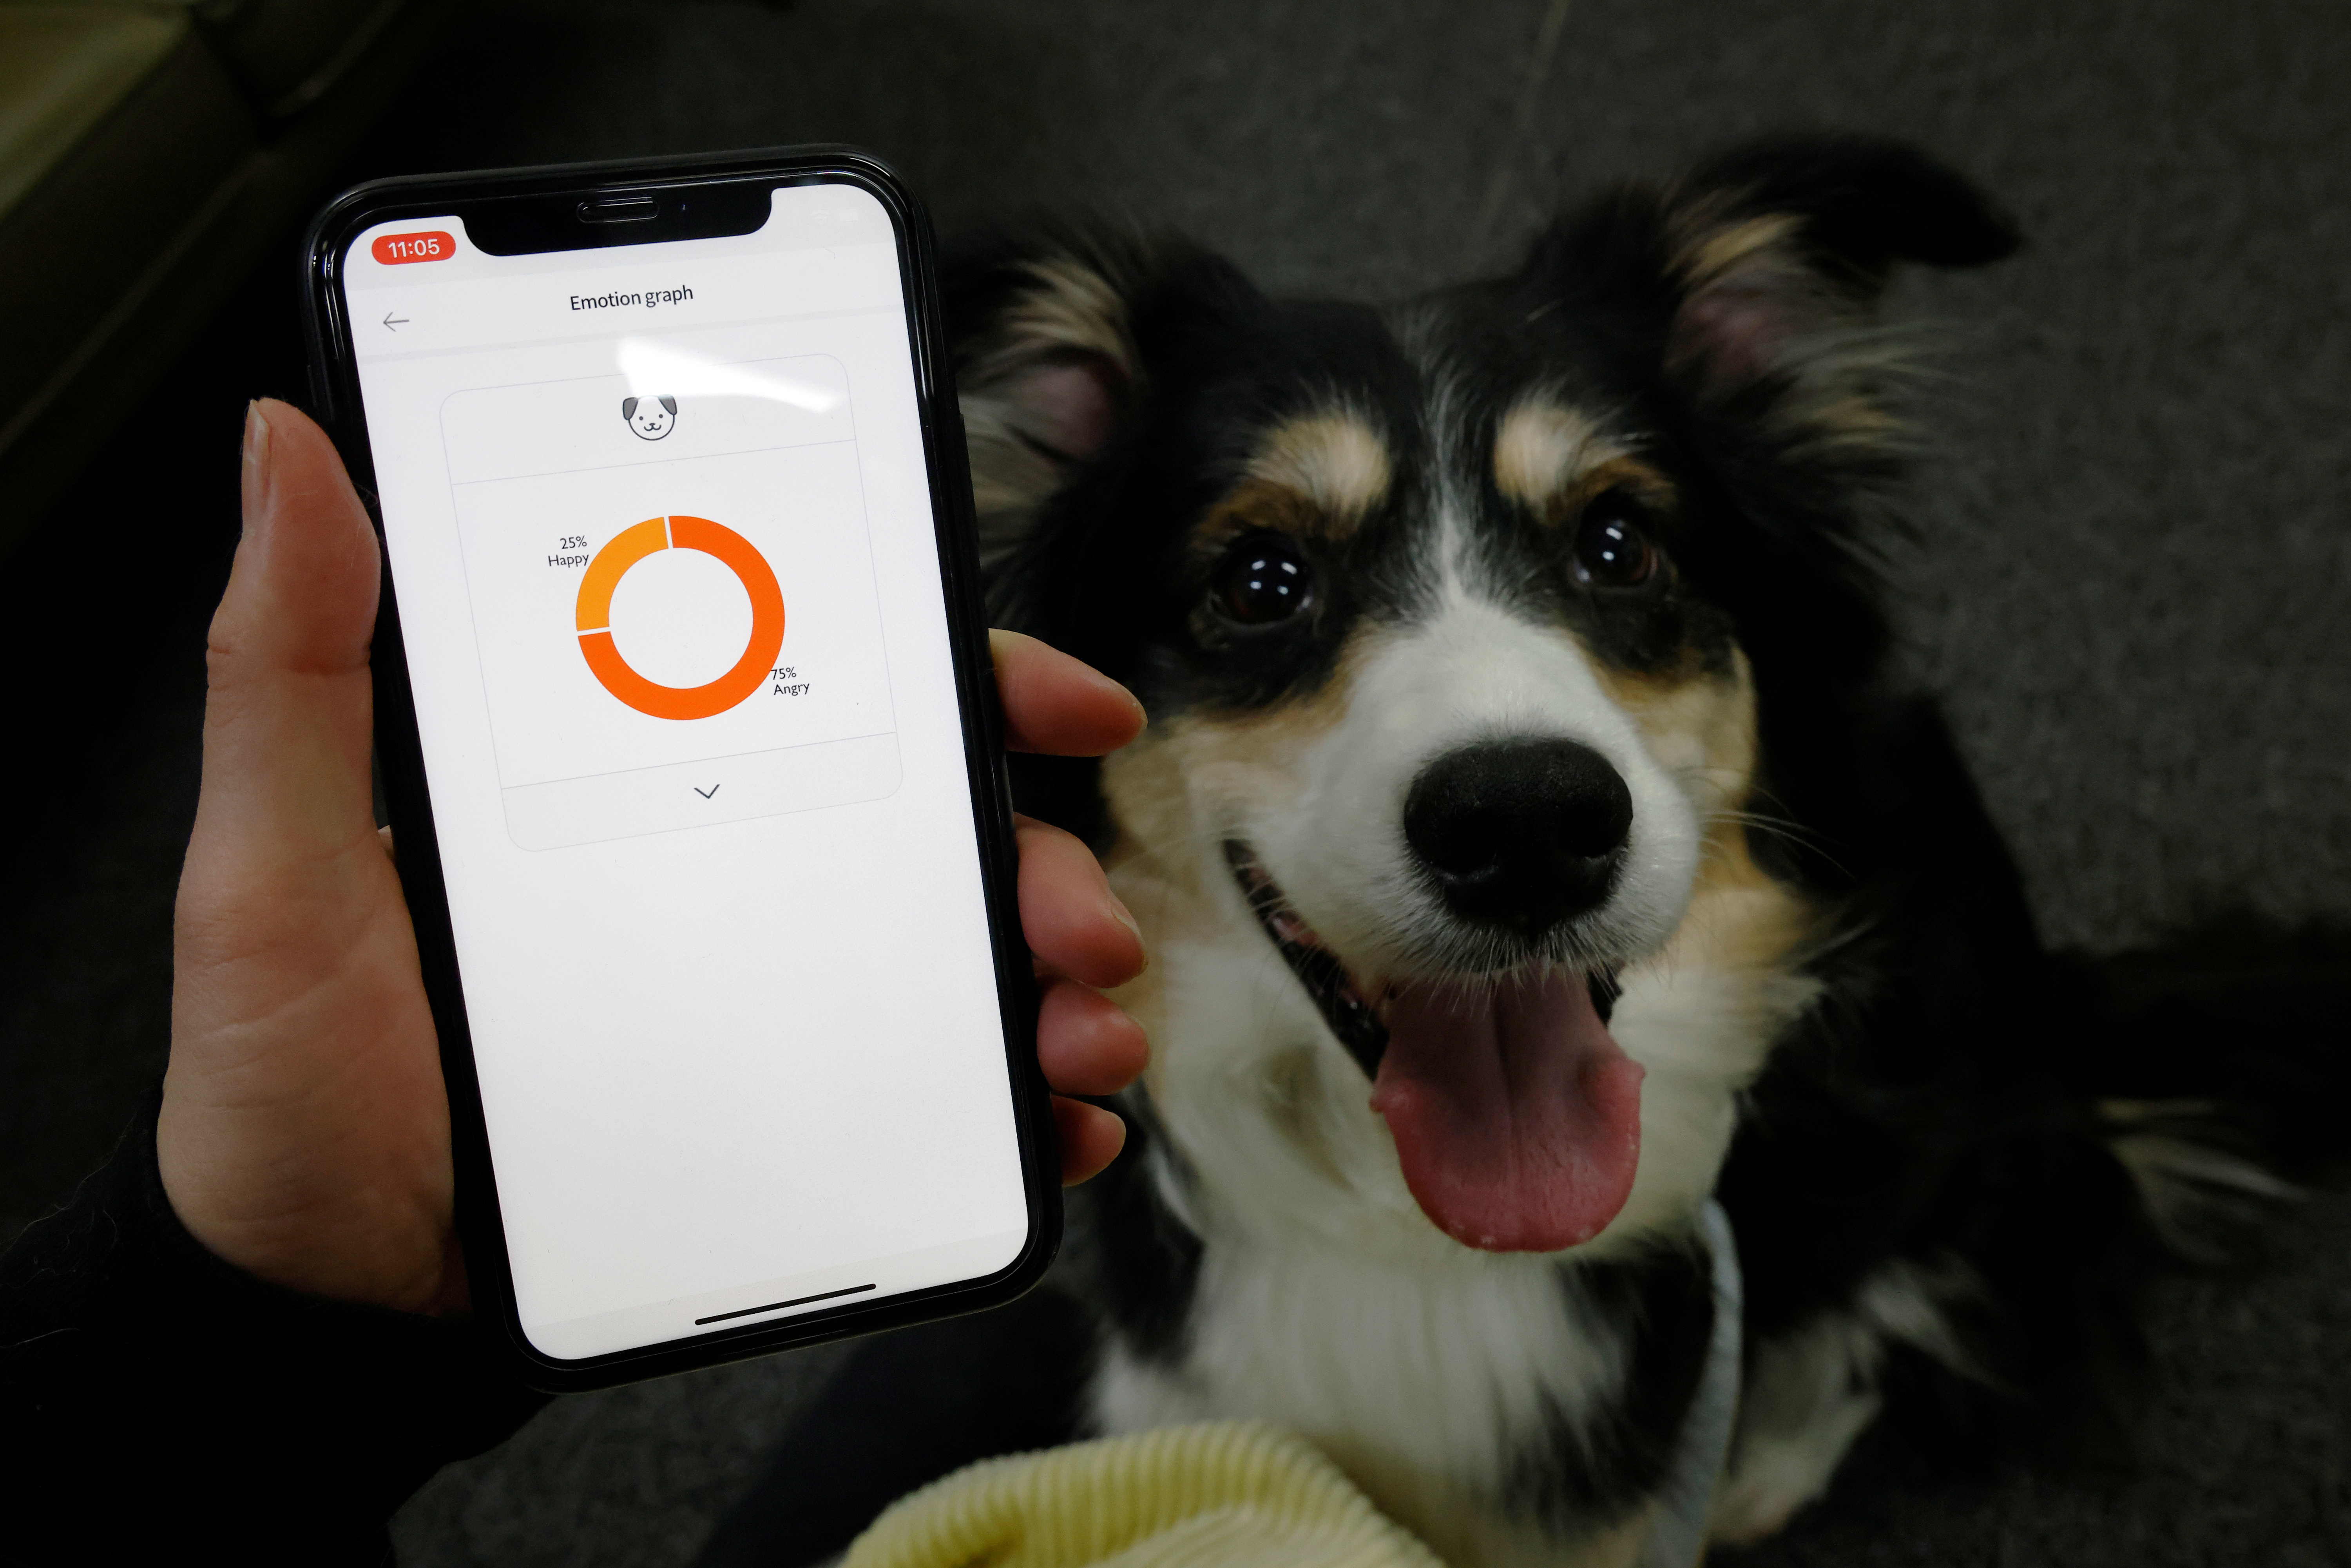 Moon Sae-mi tries out Petpuls, an AI-powered smart dog collar, with her dog Godot during a demonstration in Seoul, South Korea, January 11, 2021. Picture taken on January 11, 2021.   REUTERS/Kim Hong-Ji